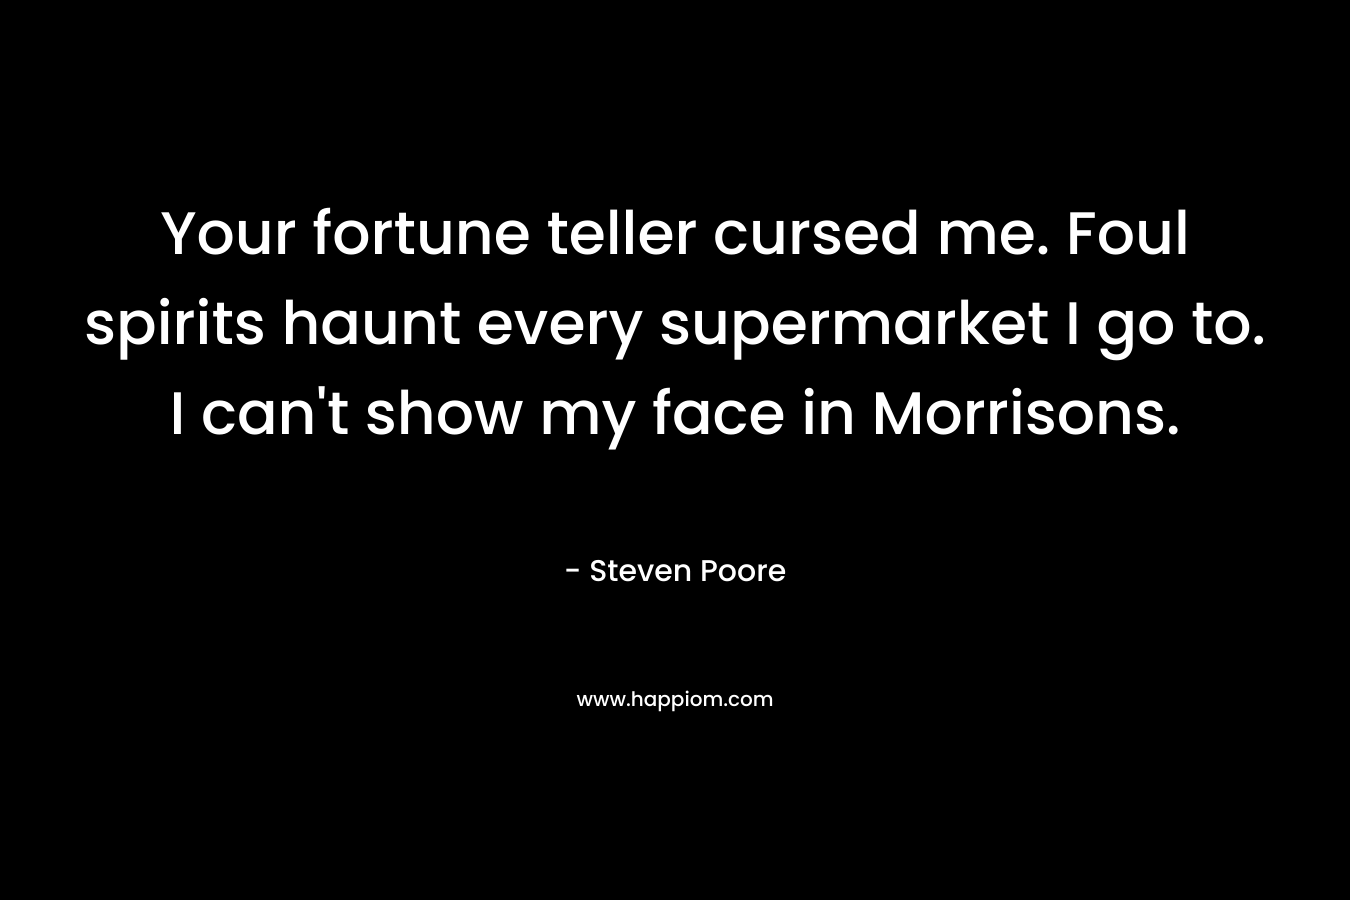 Your fortune teller cursed me. Foul spirits haunt every supermarket I go to. I can’t show my face in Morrisons. – Steven Poore